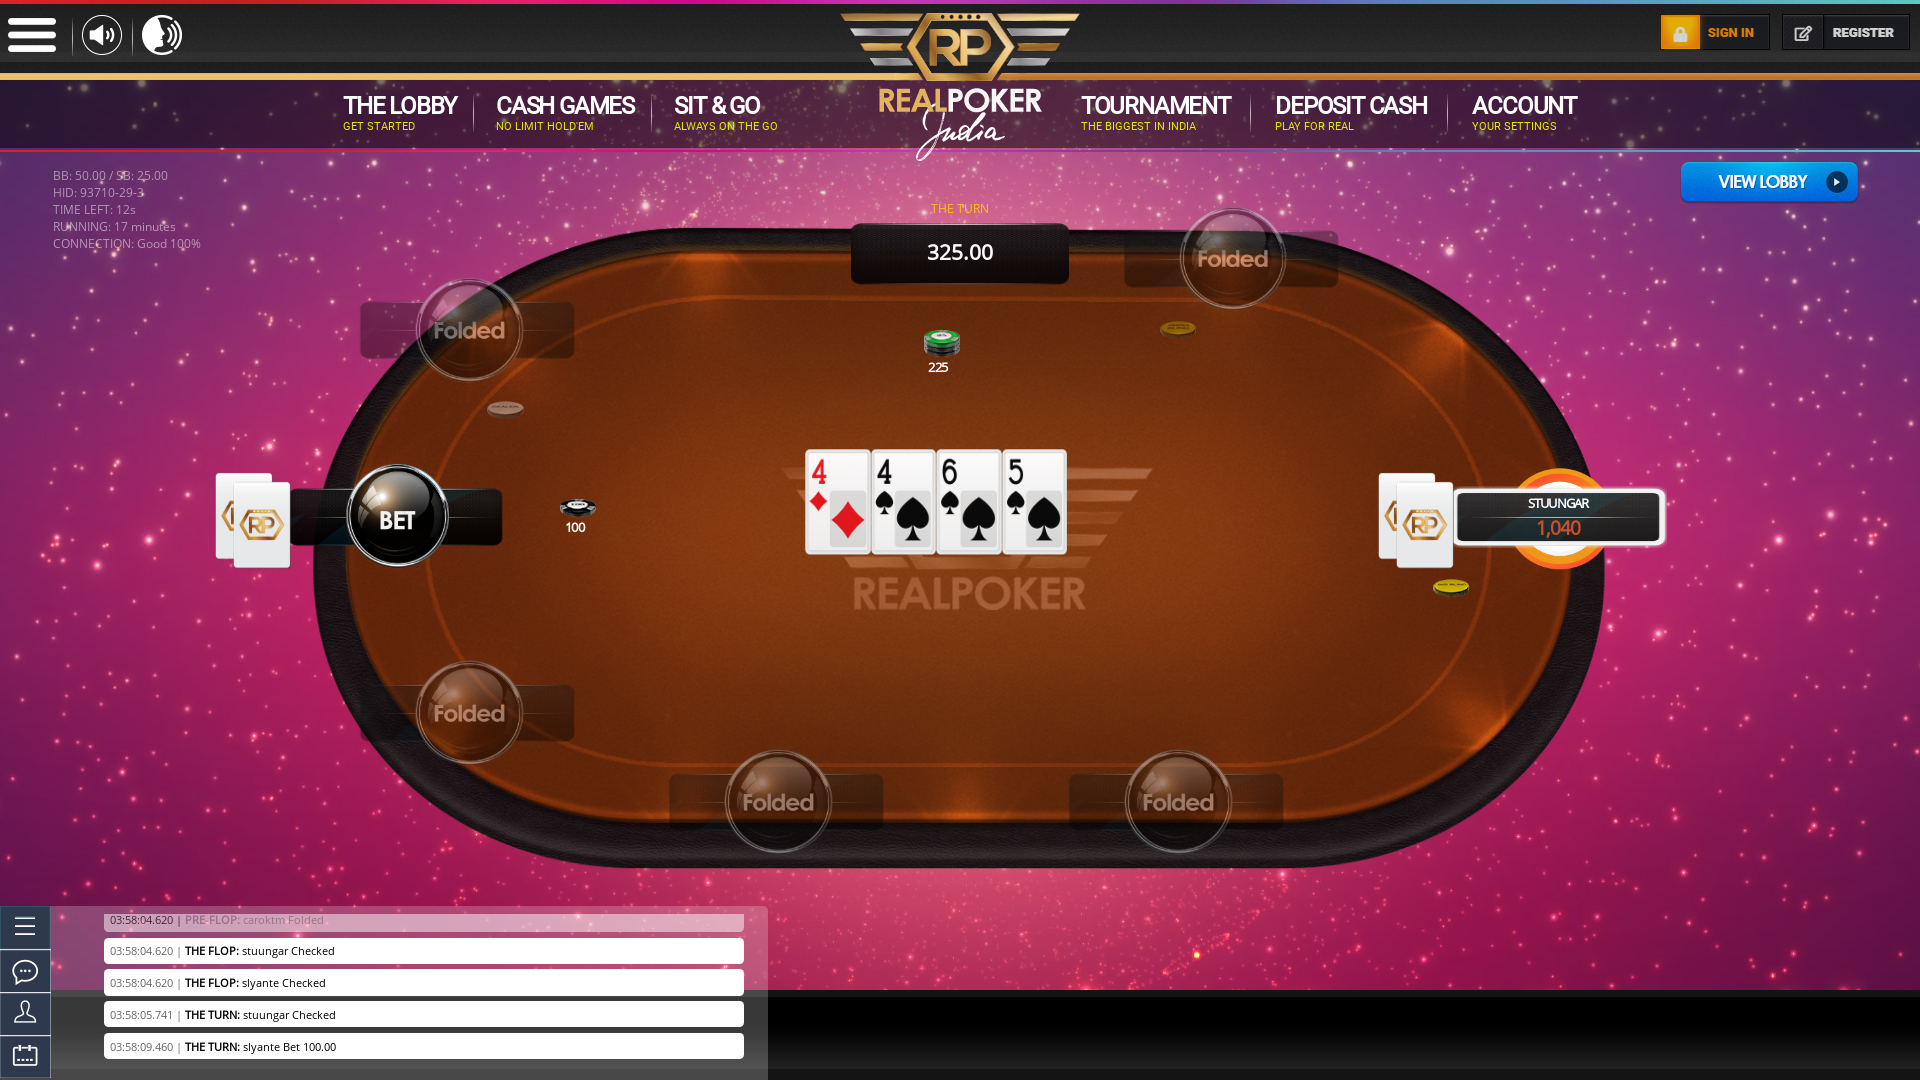 Indian poker on a 10 player table in the 17th minute